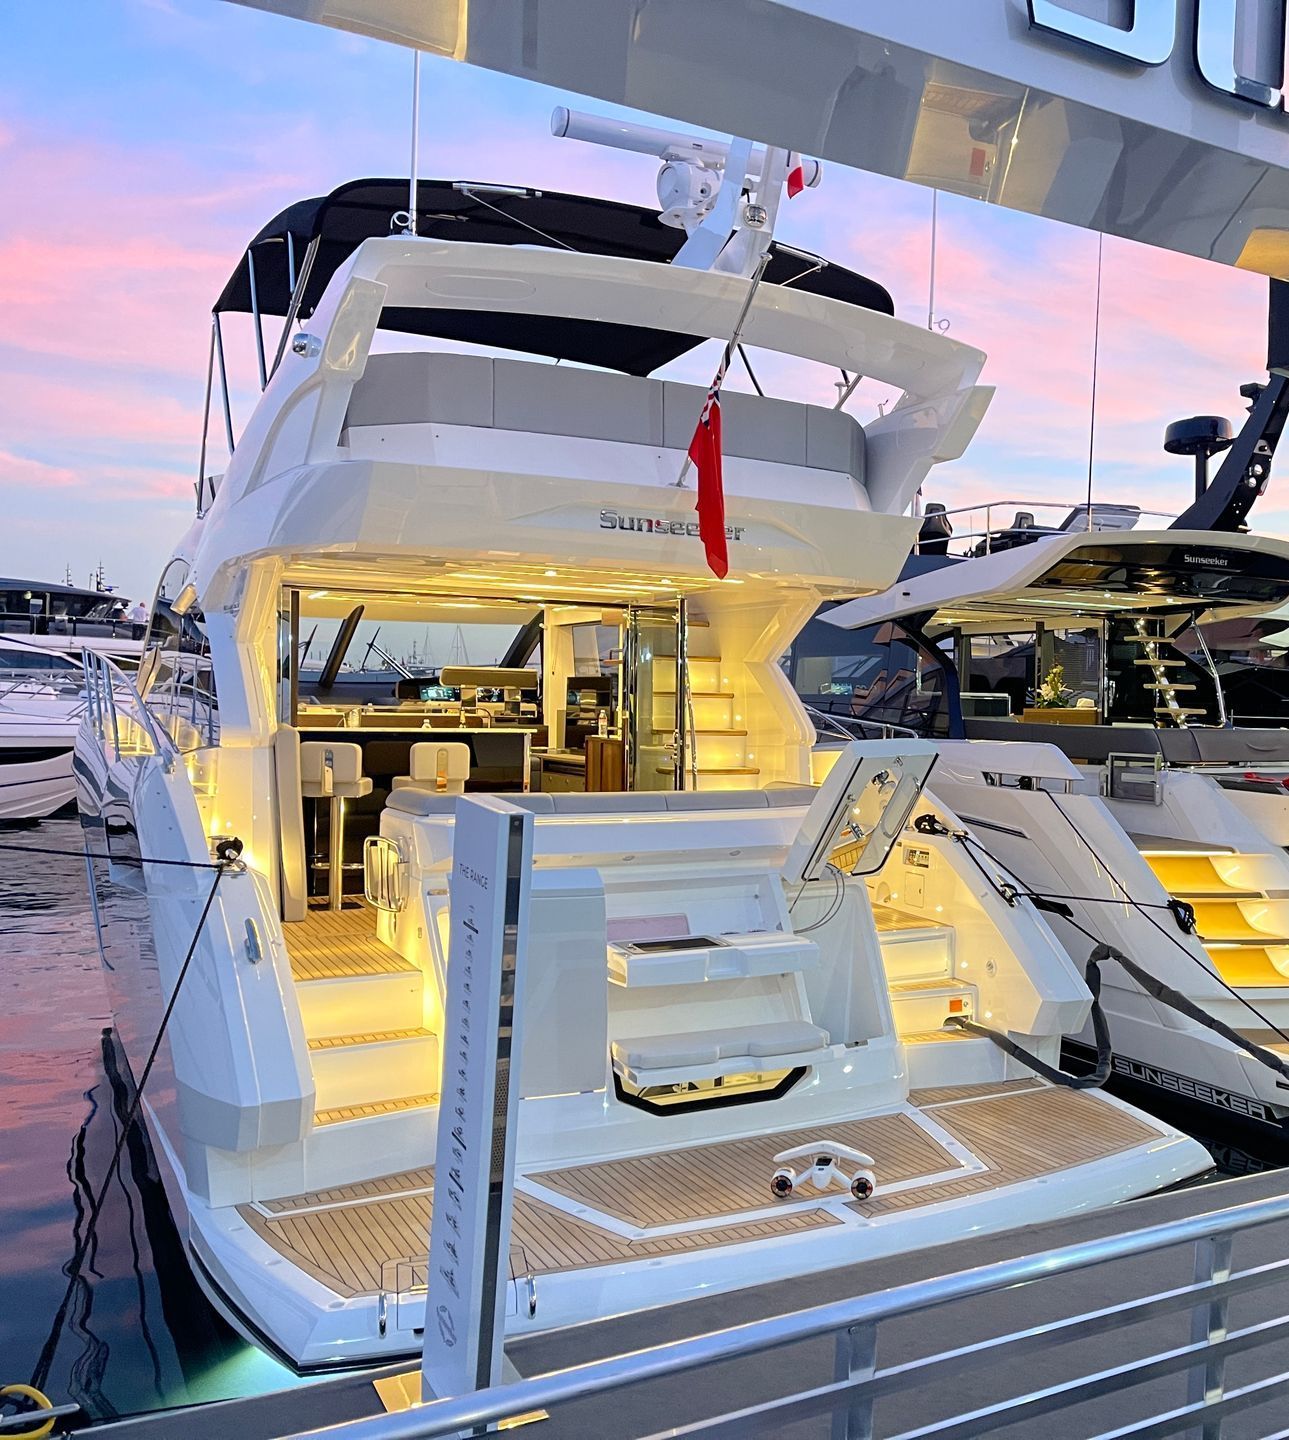 Sunseeker Yachts for Sale in Ft. Lauderdale Miami 